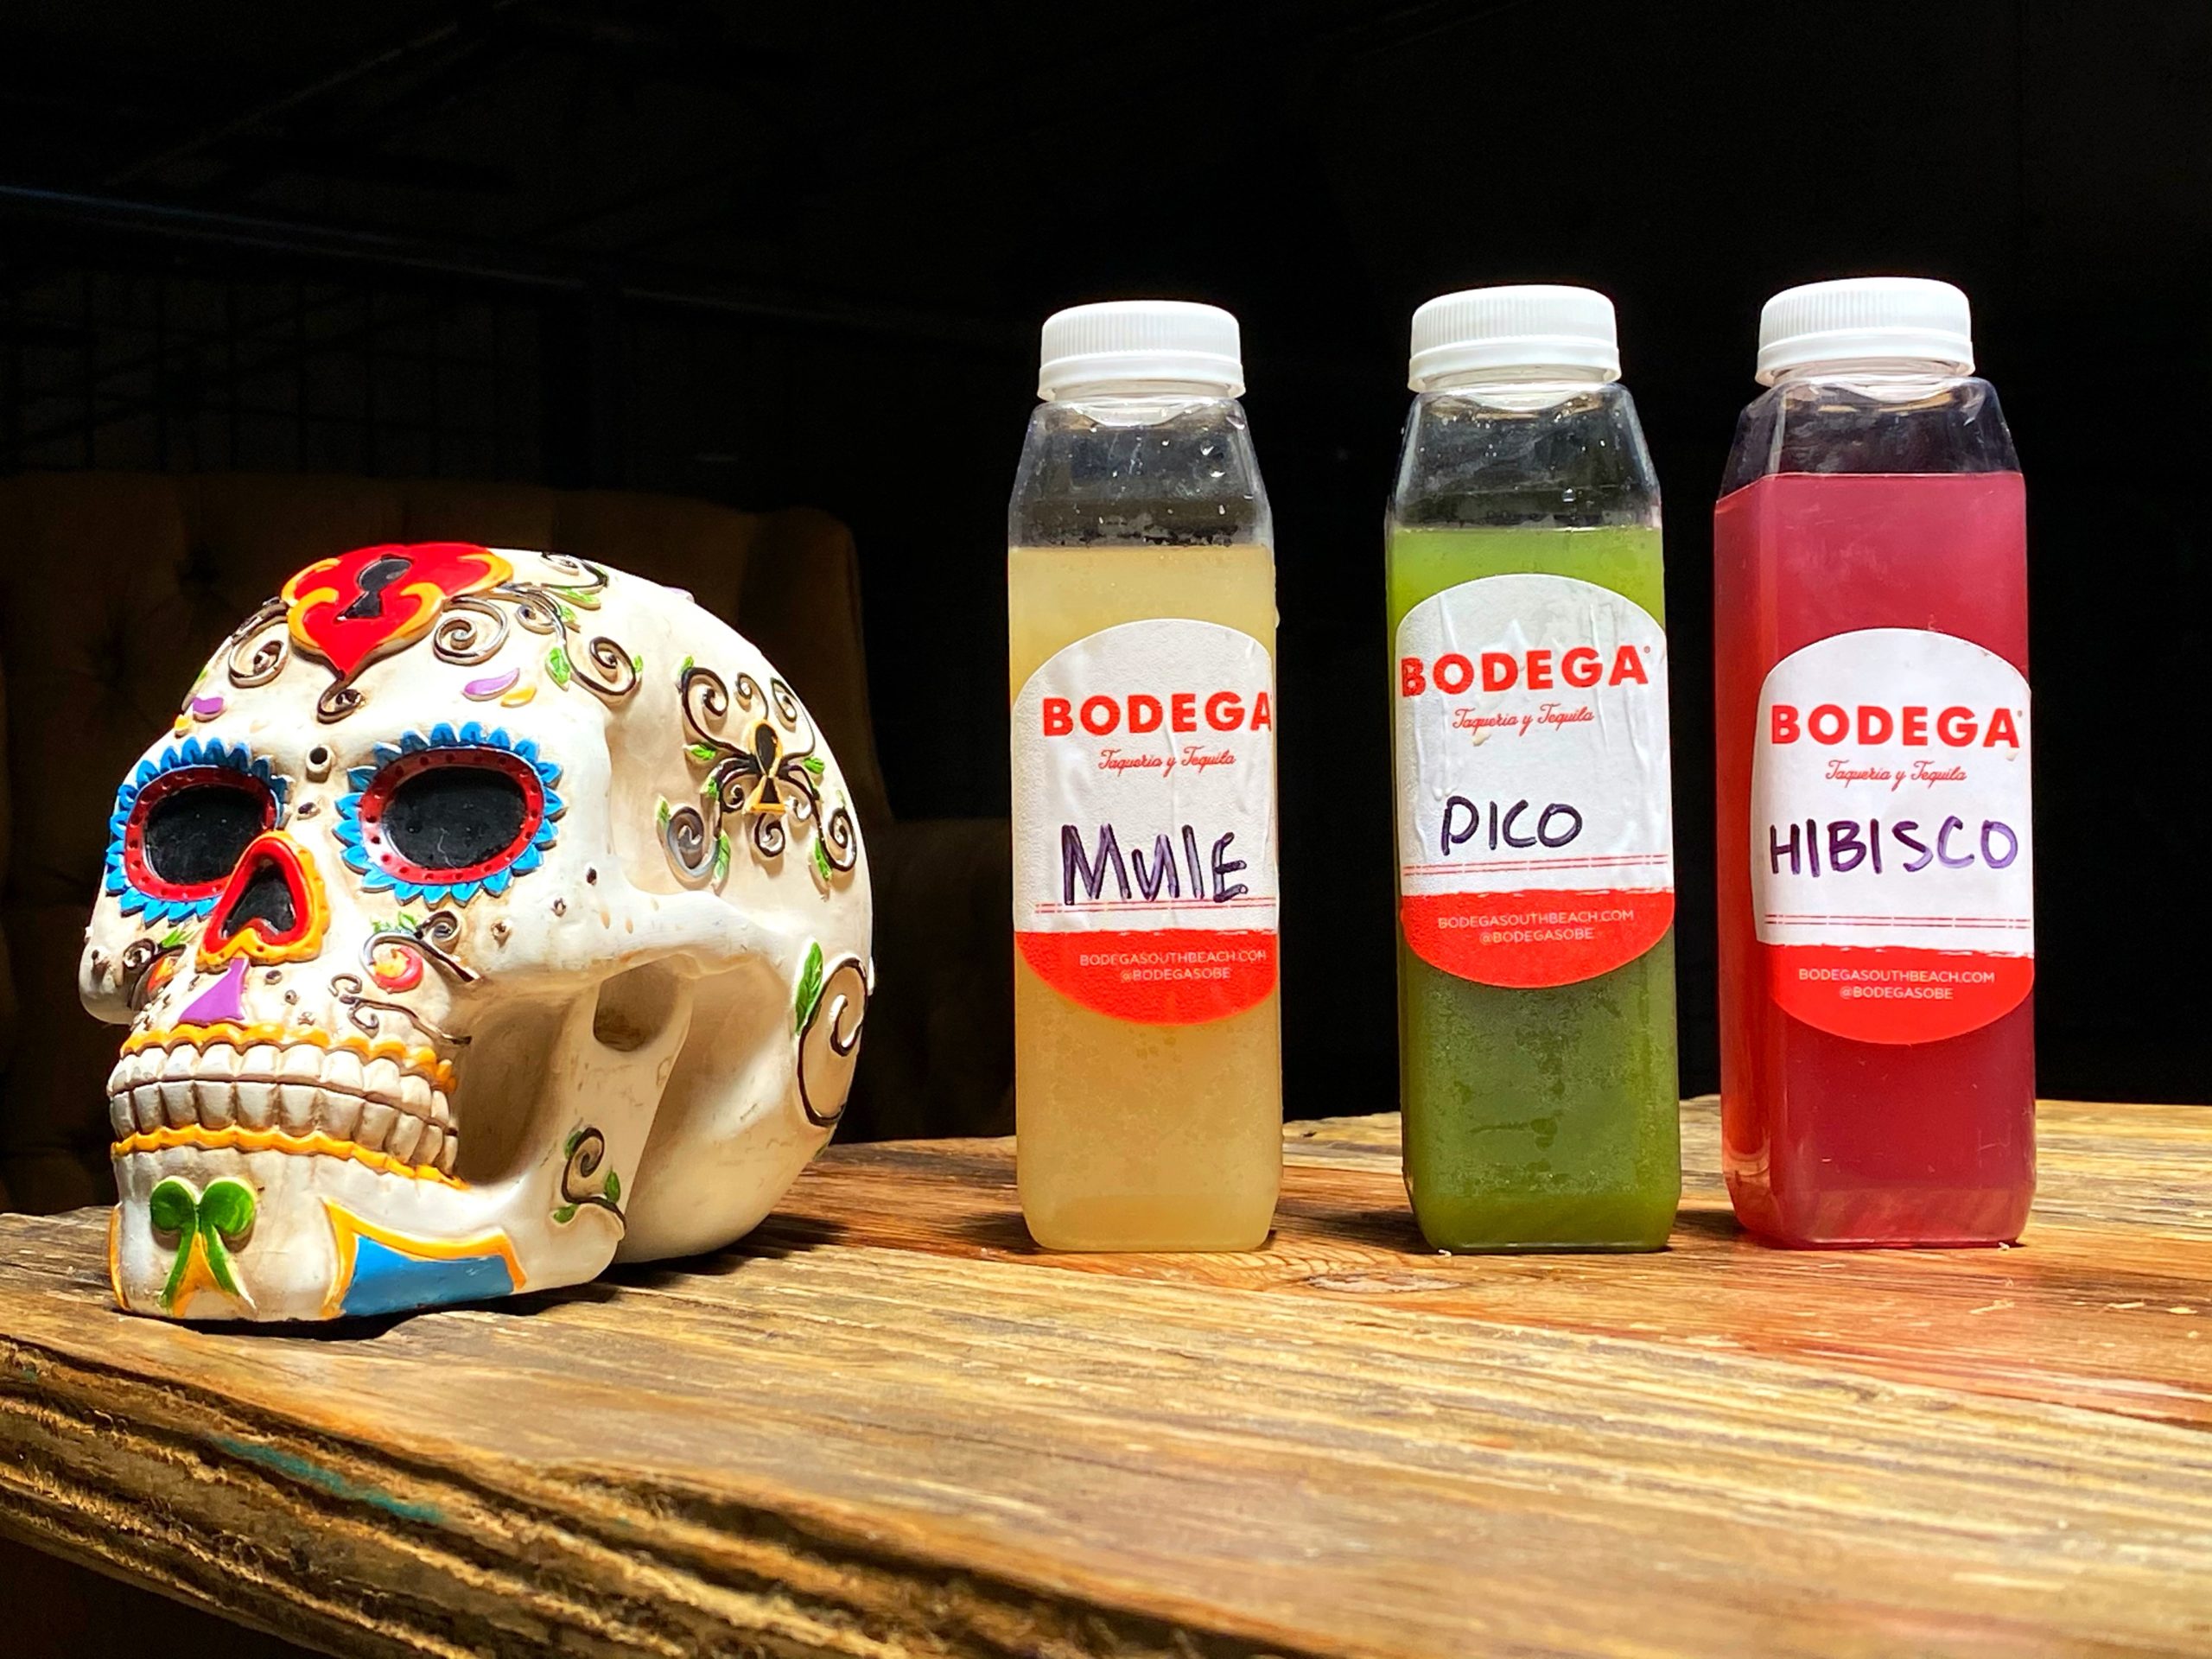 Bodega in Miami Beach offers three bottled cocktails to go